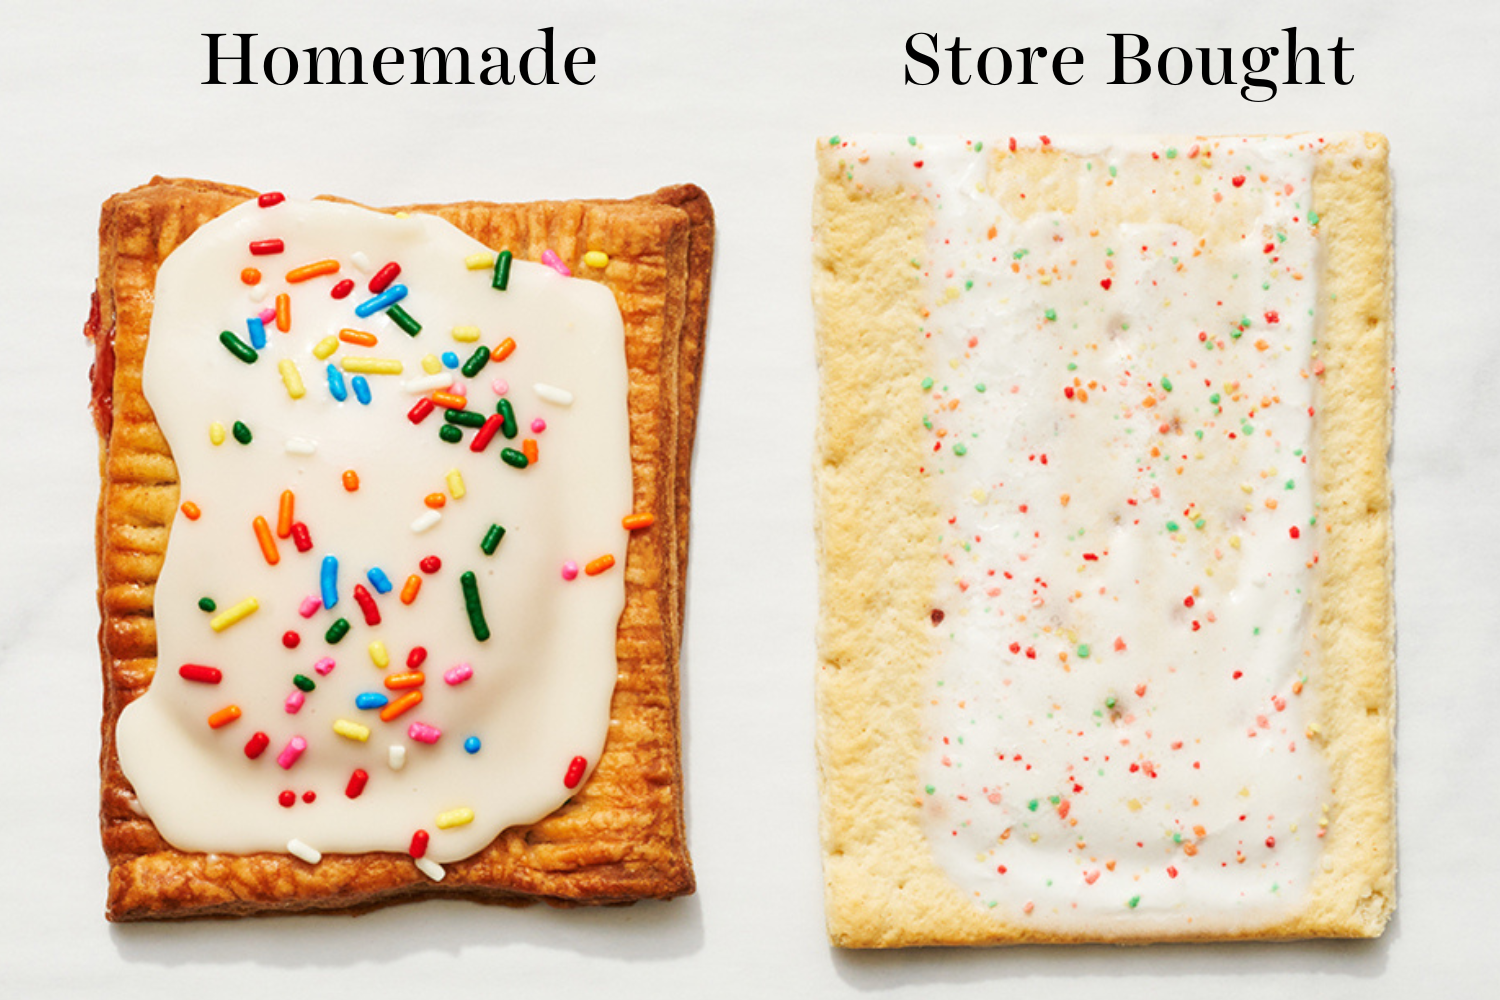 a homemade pop tart next to a store bought Pop Tart, to compare the two side-by-side.